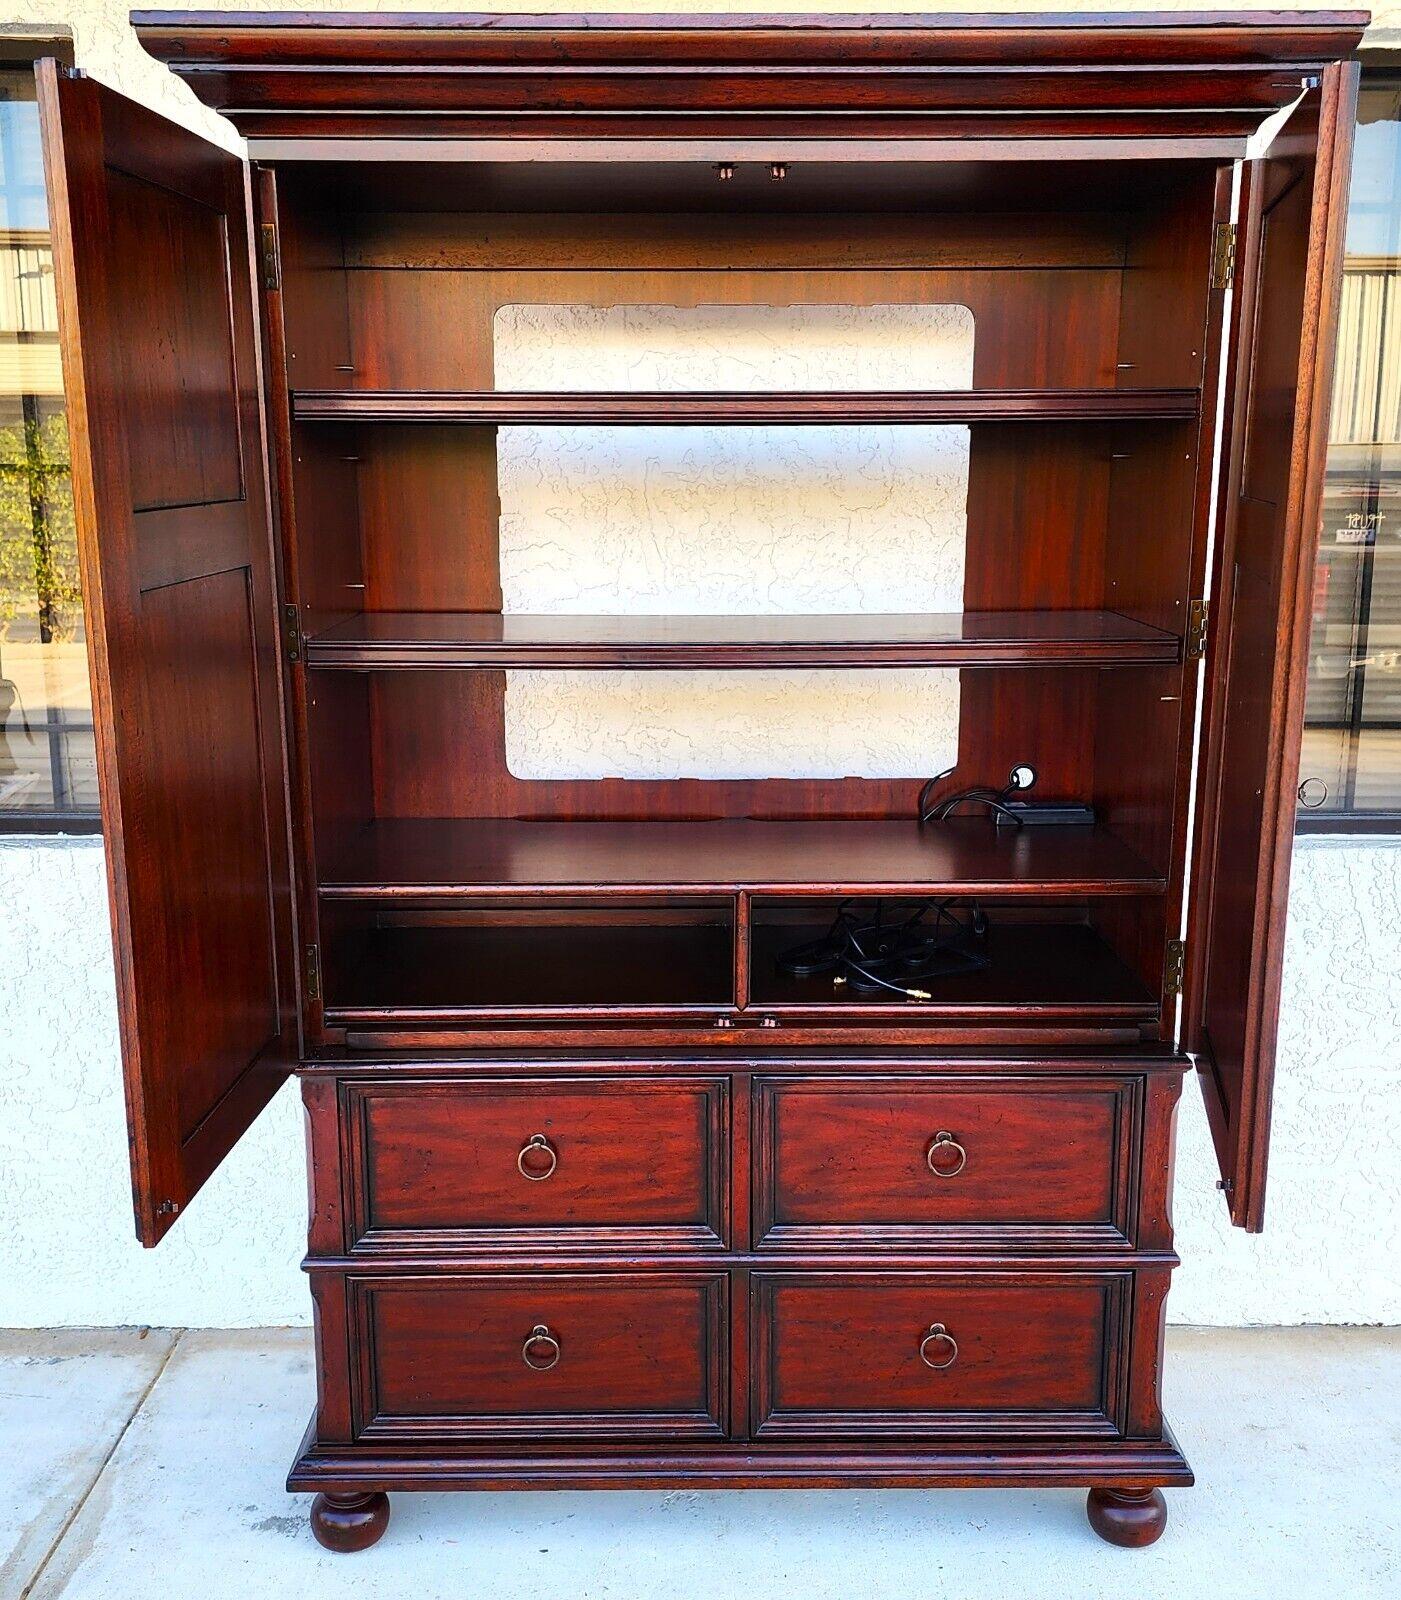 Offering one of our recent Palm Beach Estate fine furniture Acquisitions of A
Mahogany Armoire by Ralph Lauren
Featuring 4 bottom drawers and 2 adjustable and removable shelves.
It's a 2 piece unit so it is easy to move.

Approximate